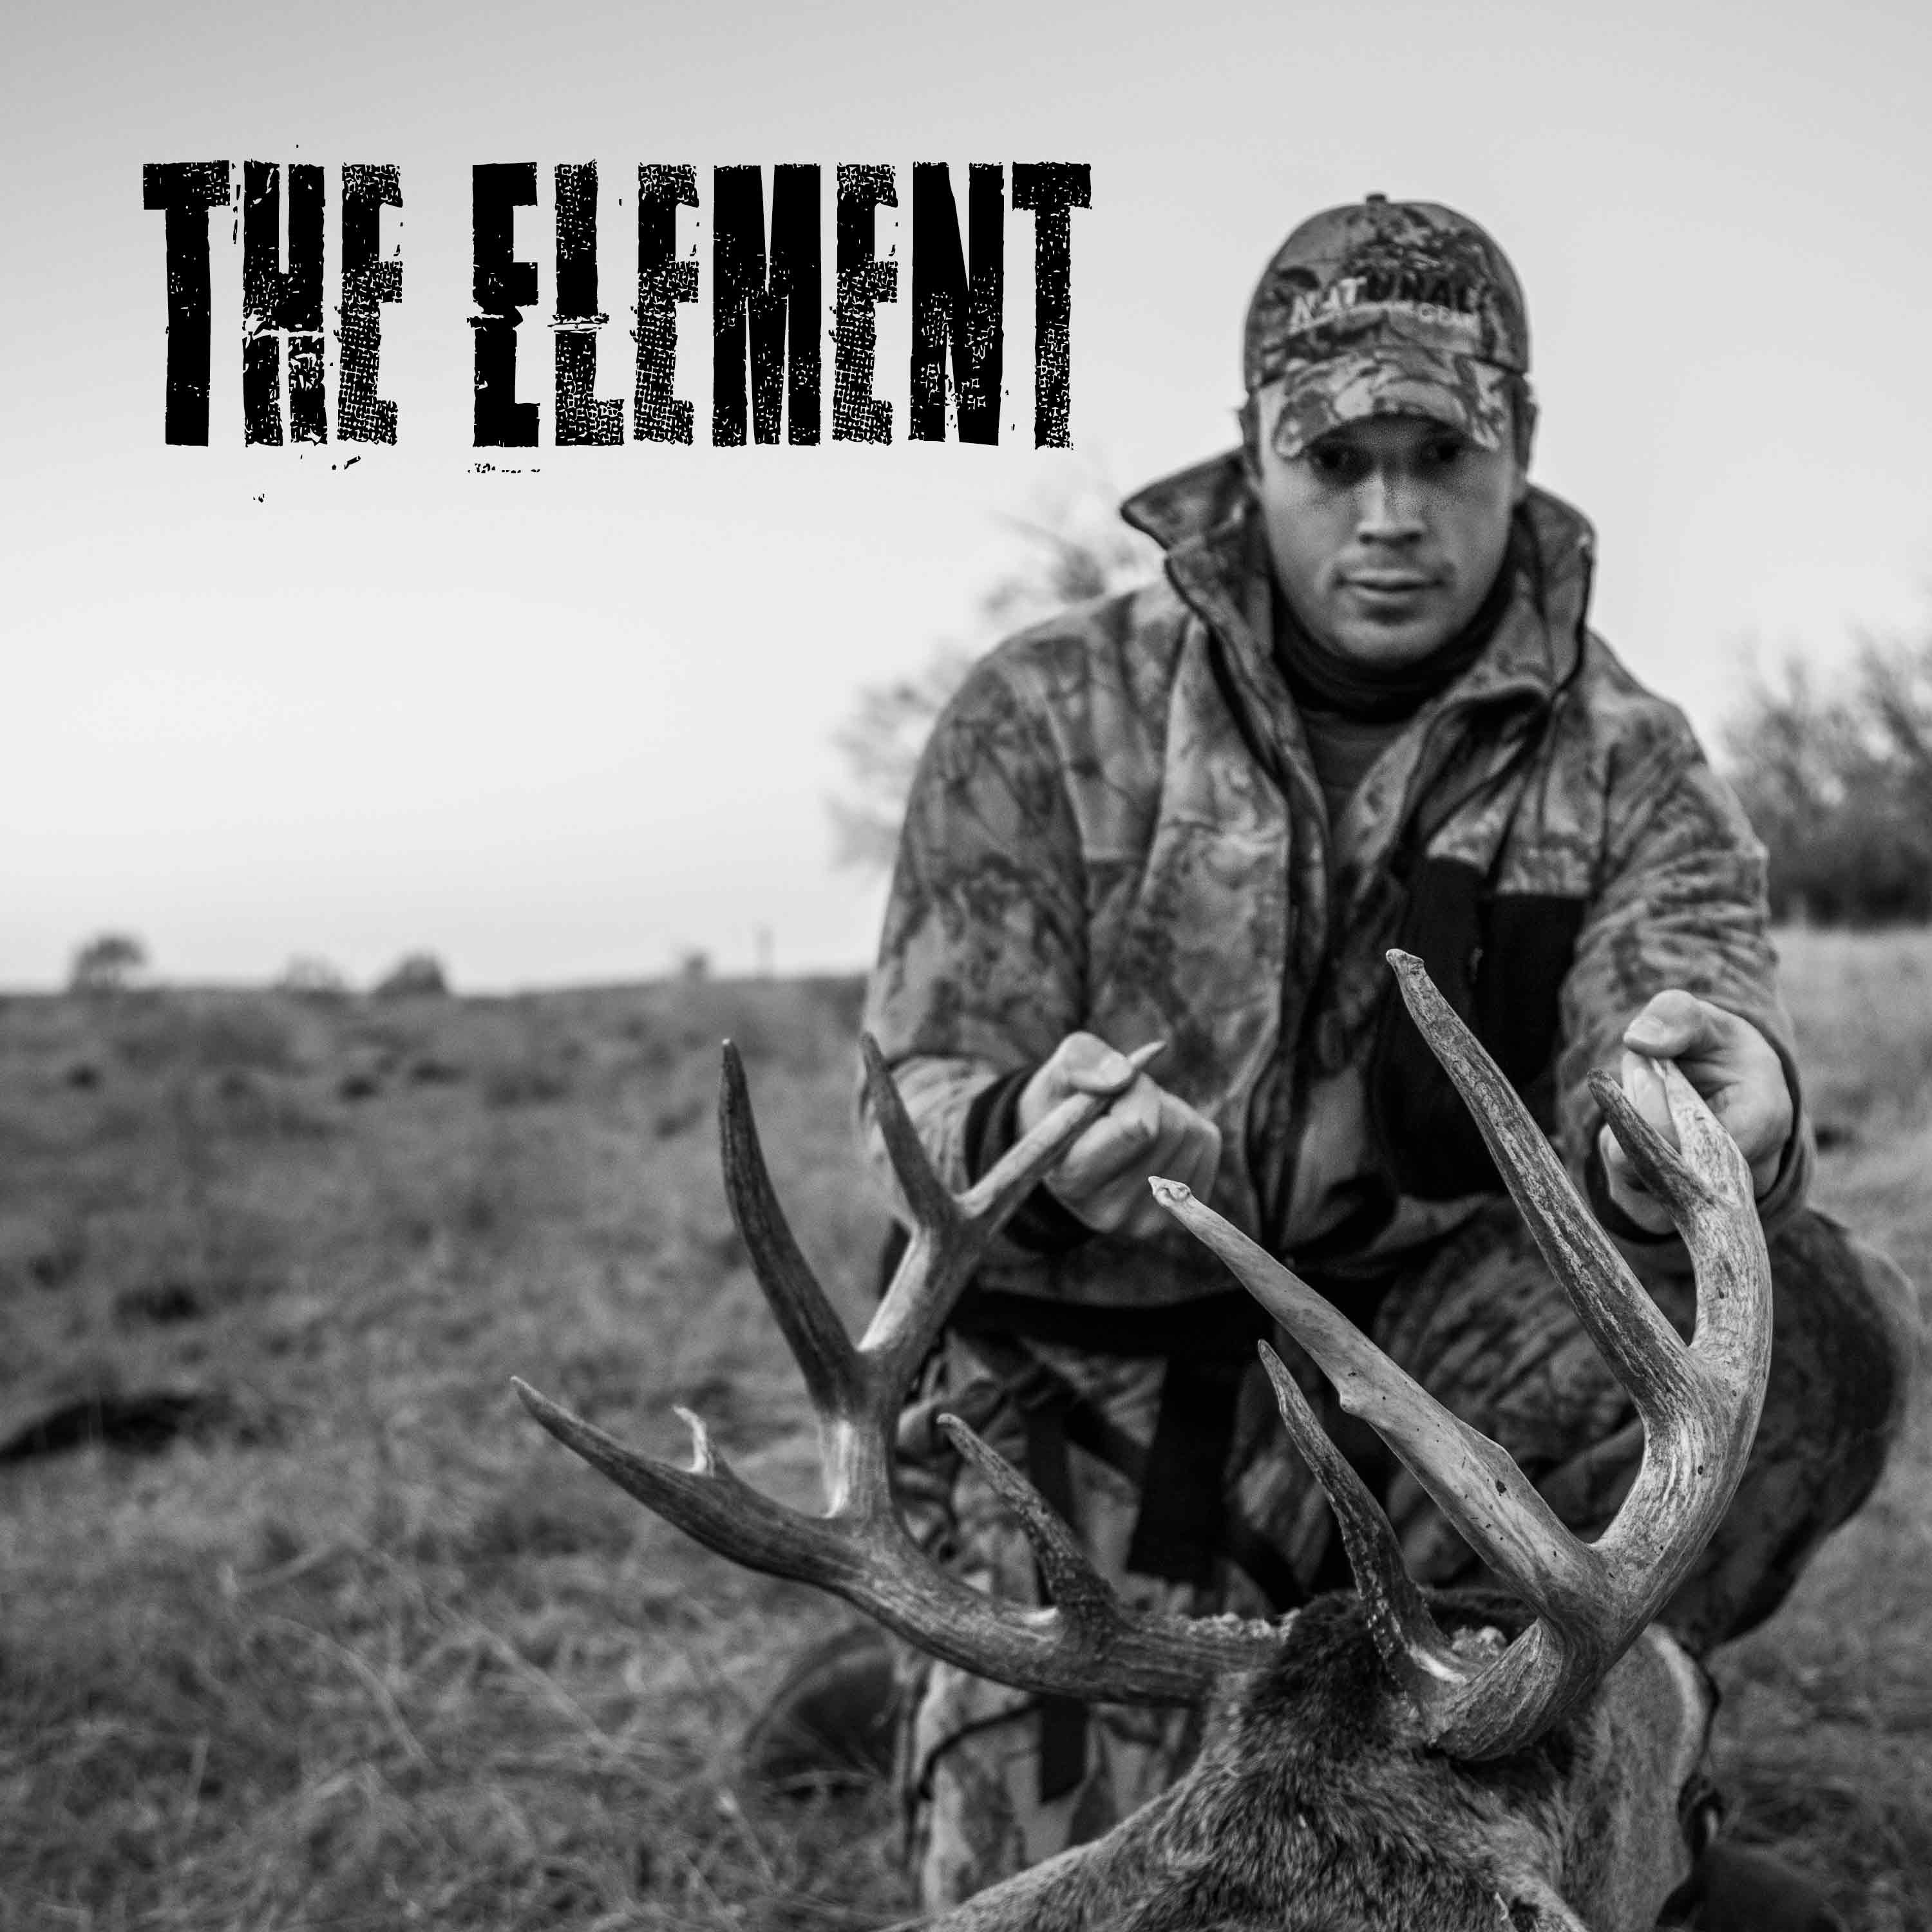 E202: BUDGET BUCKS (Hunting Efficiently, Saving Time and Money, Gear That Works, Maximizing Your Travel Experience, Deer Licenses Tags and Draws, Cheap or Free Access Tips)